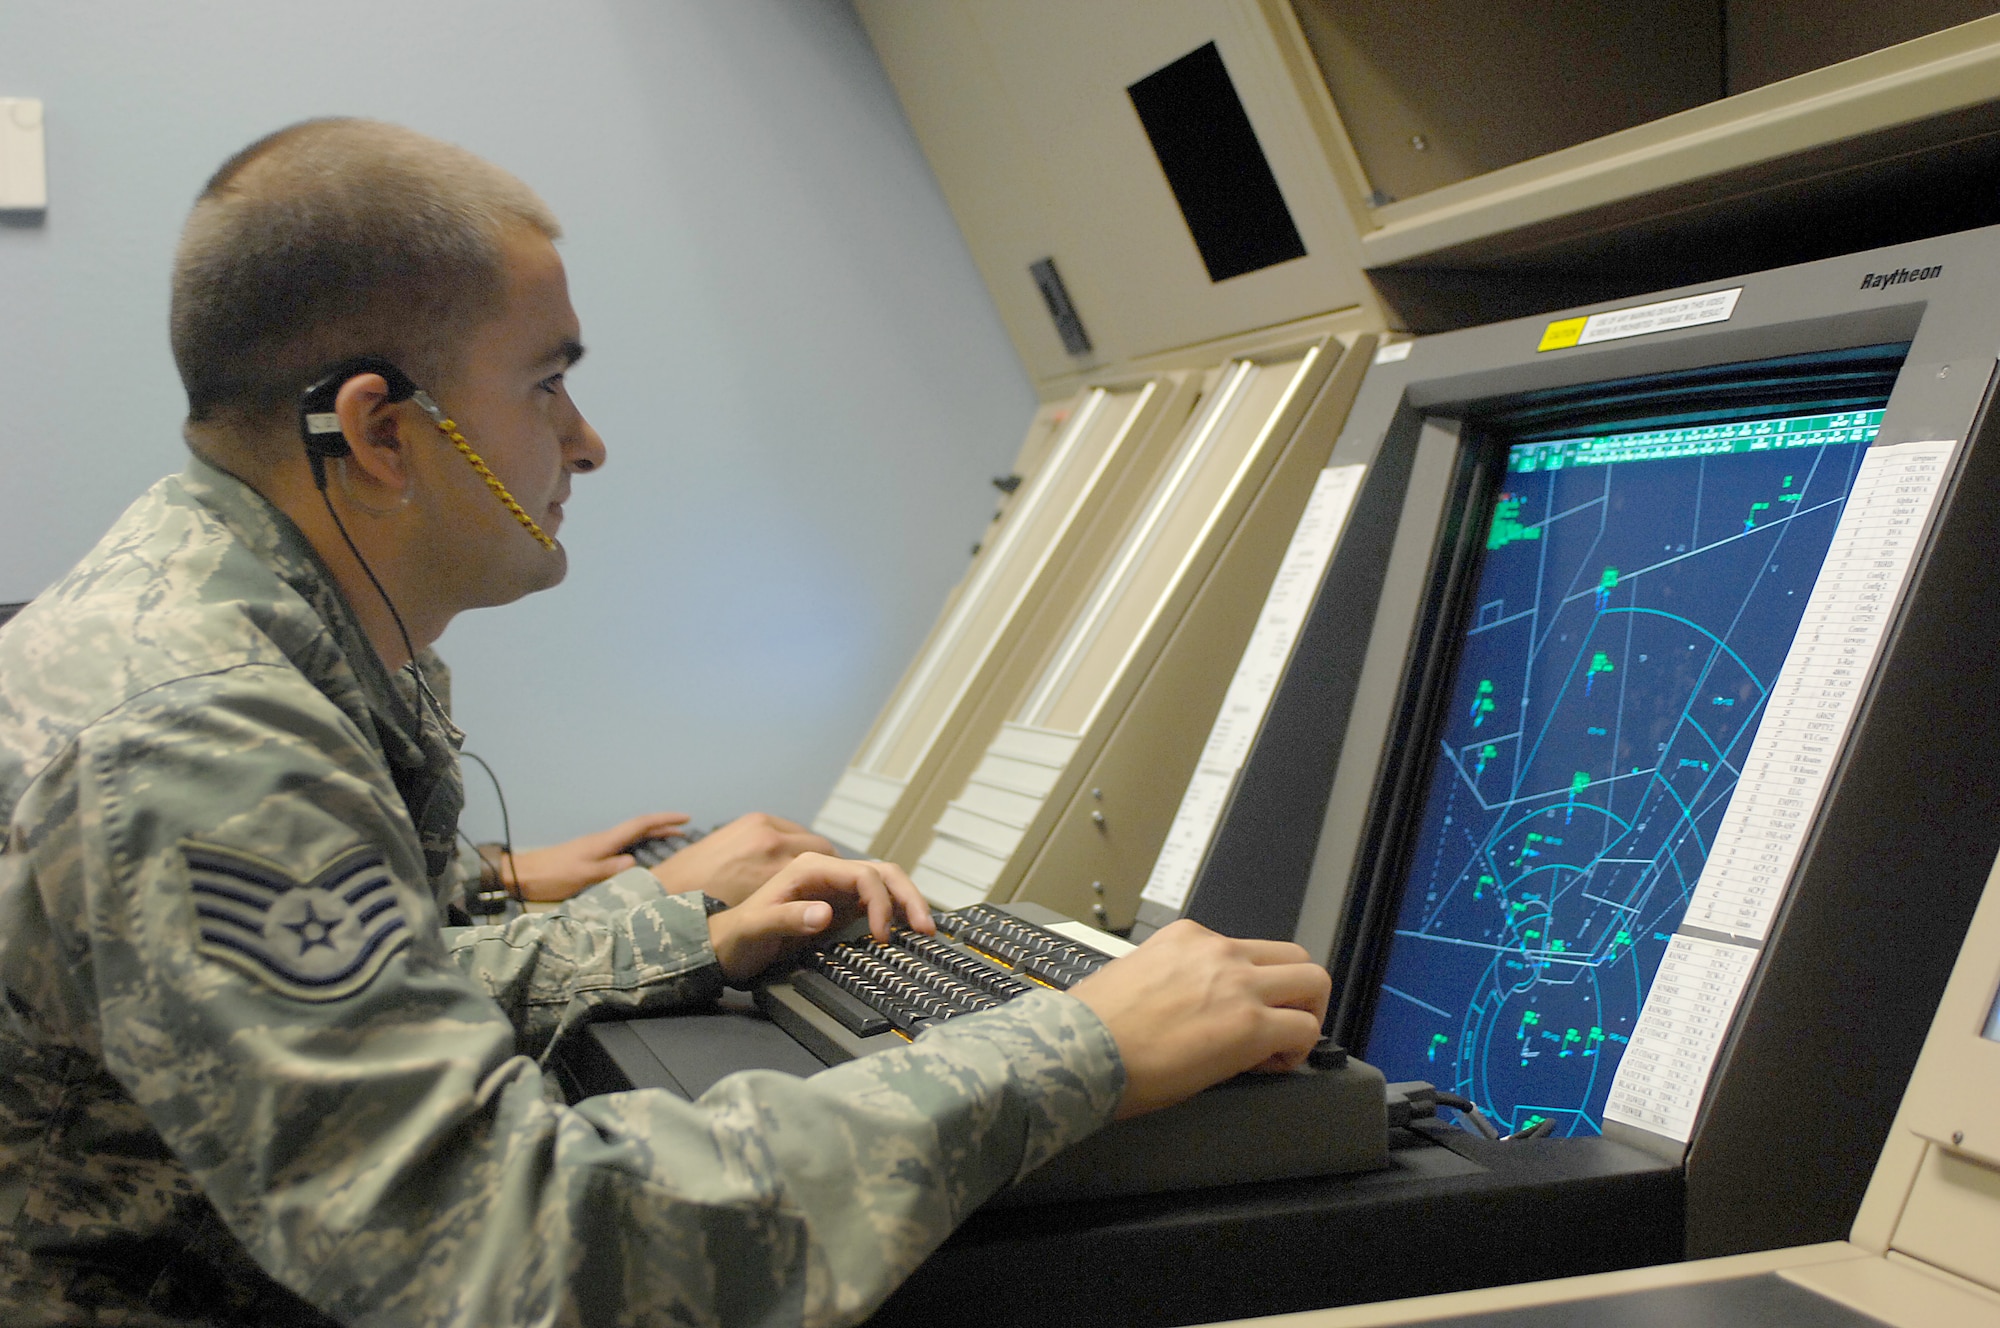 Staff Sgt. Christopher Beier, 57th Wing Air Traffic Controller, monitors radar activity on the newly installed Standard Terminal Automation Replacement System, or STARS, Oct. 15, 2014, at Nellis Air Force Base, Nev. Over the last month, the Nellis Air Traffic Control facilities activated the new radar system to replace capacity-constrained, older technology systems. (U.S. Air Force photo by Staff Sgt. Jack Sanders)